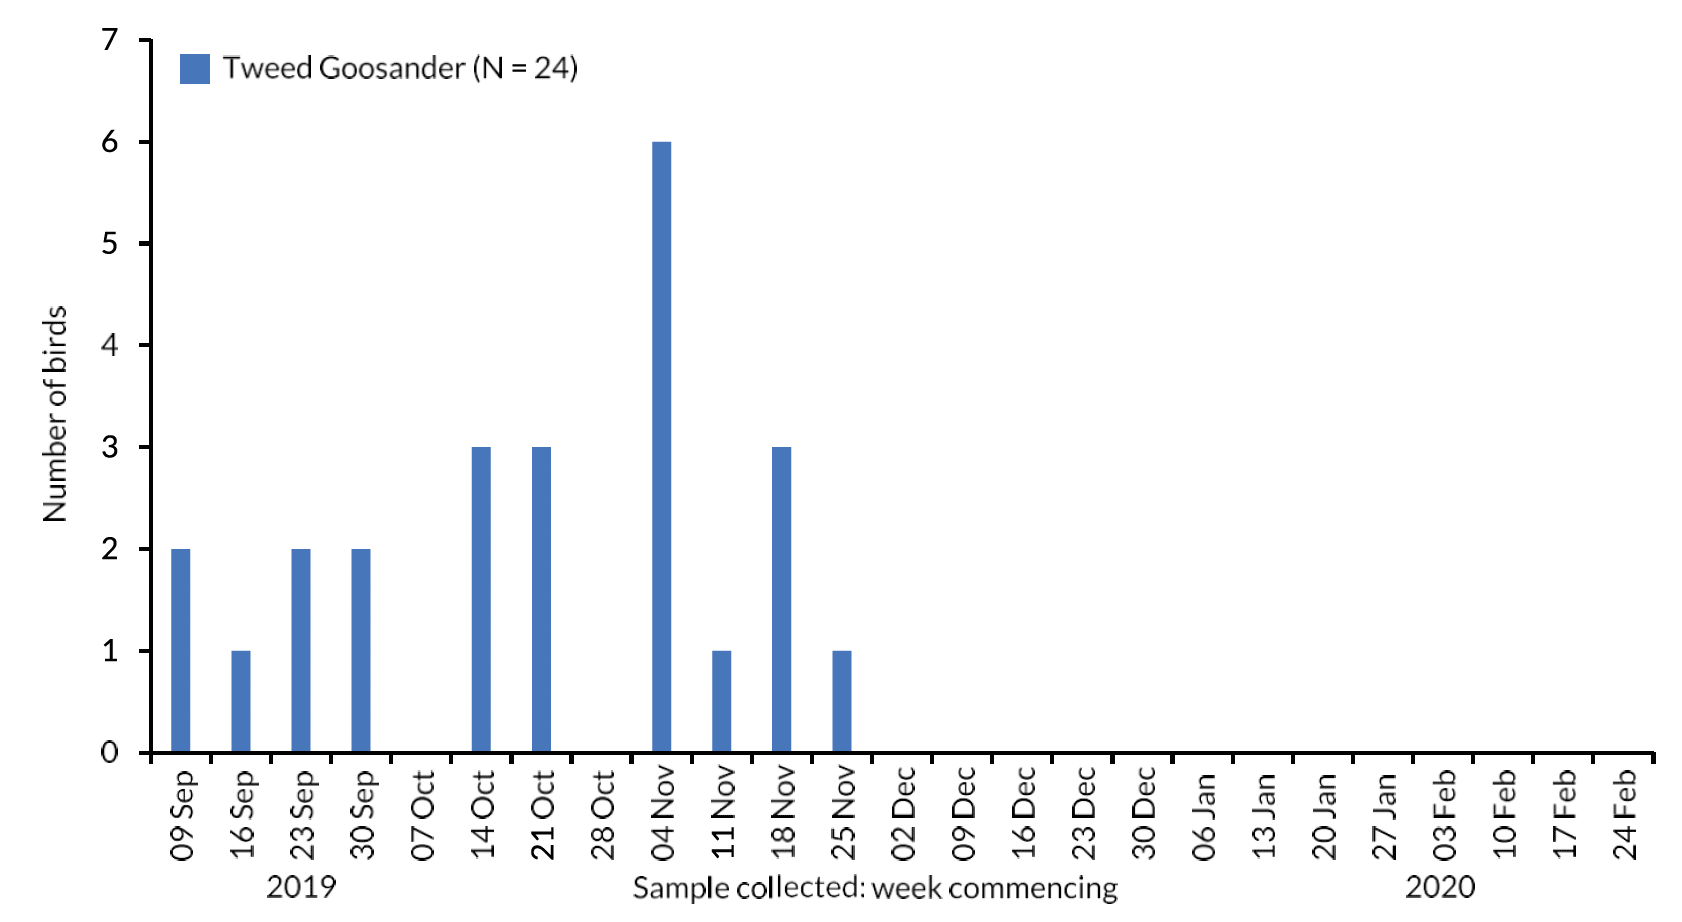 Bar chart of the number of River Tweed Goosanders collected each week during the autumn- winter period 2019/20.